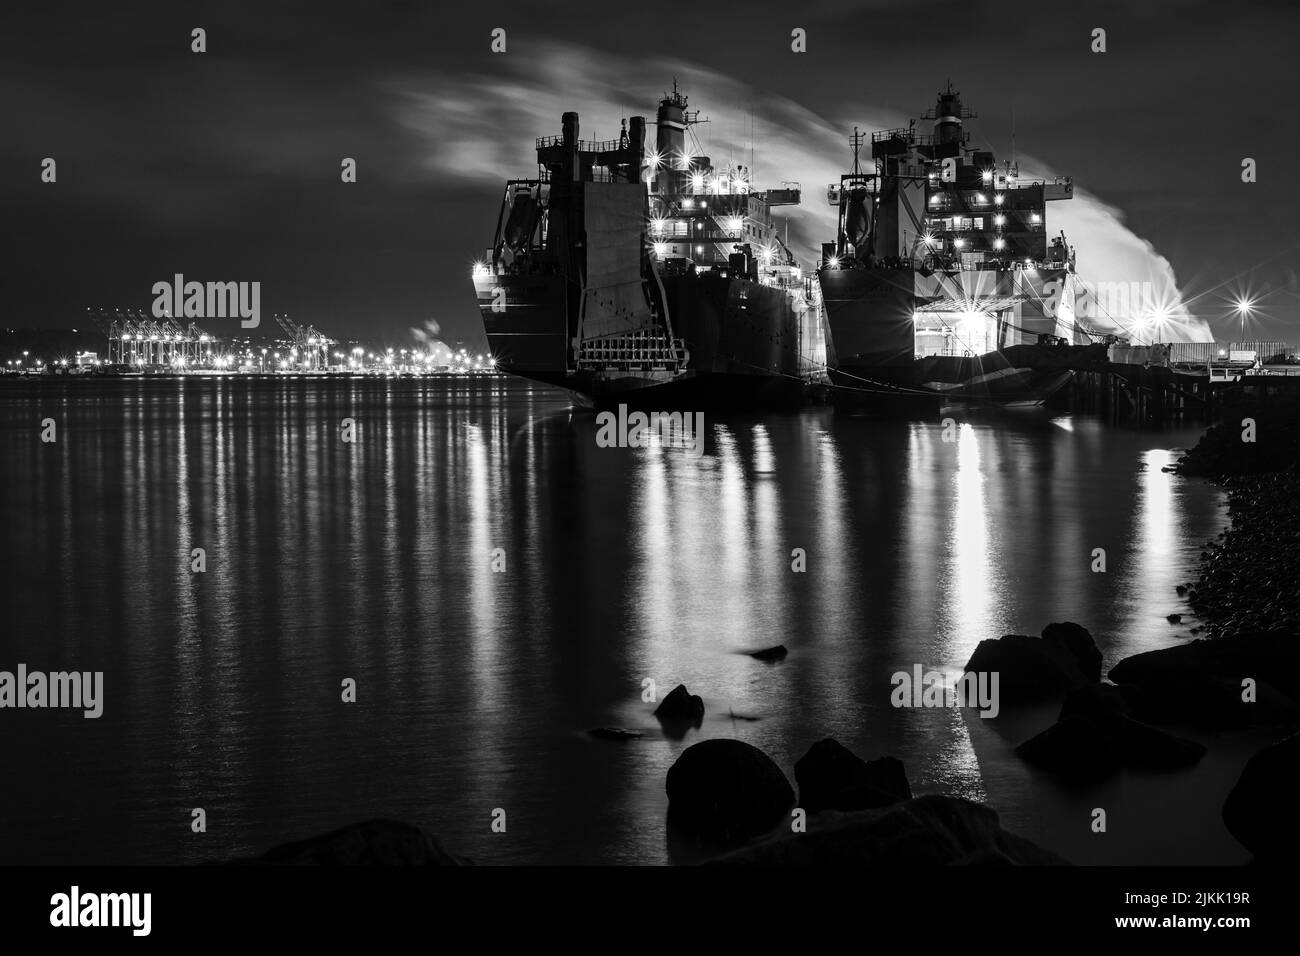 A long exposure night black white photo depicting two large ships at port Stock Photo